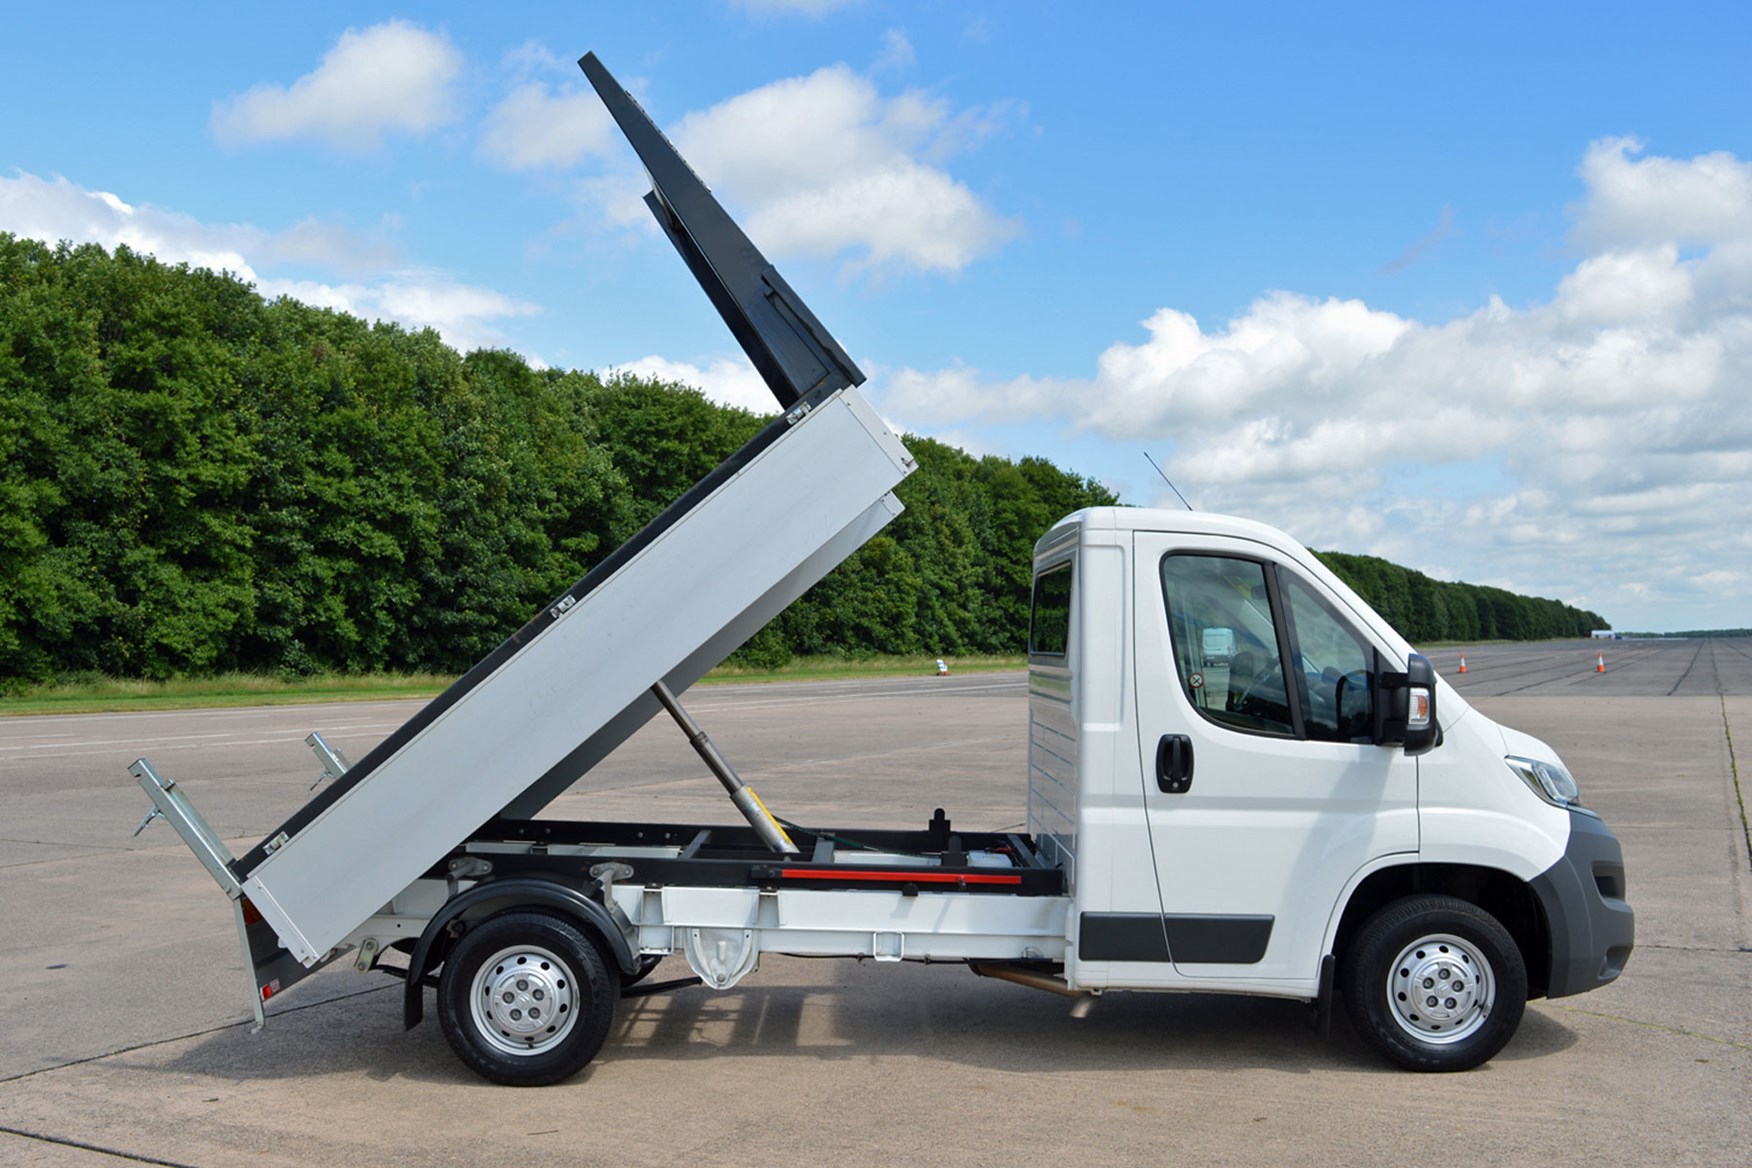 Citroen Relay 2.2 HDi Tipper review - side view, tipper-bed raised